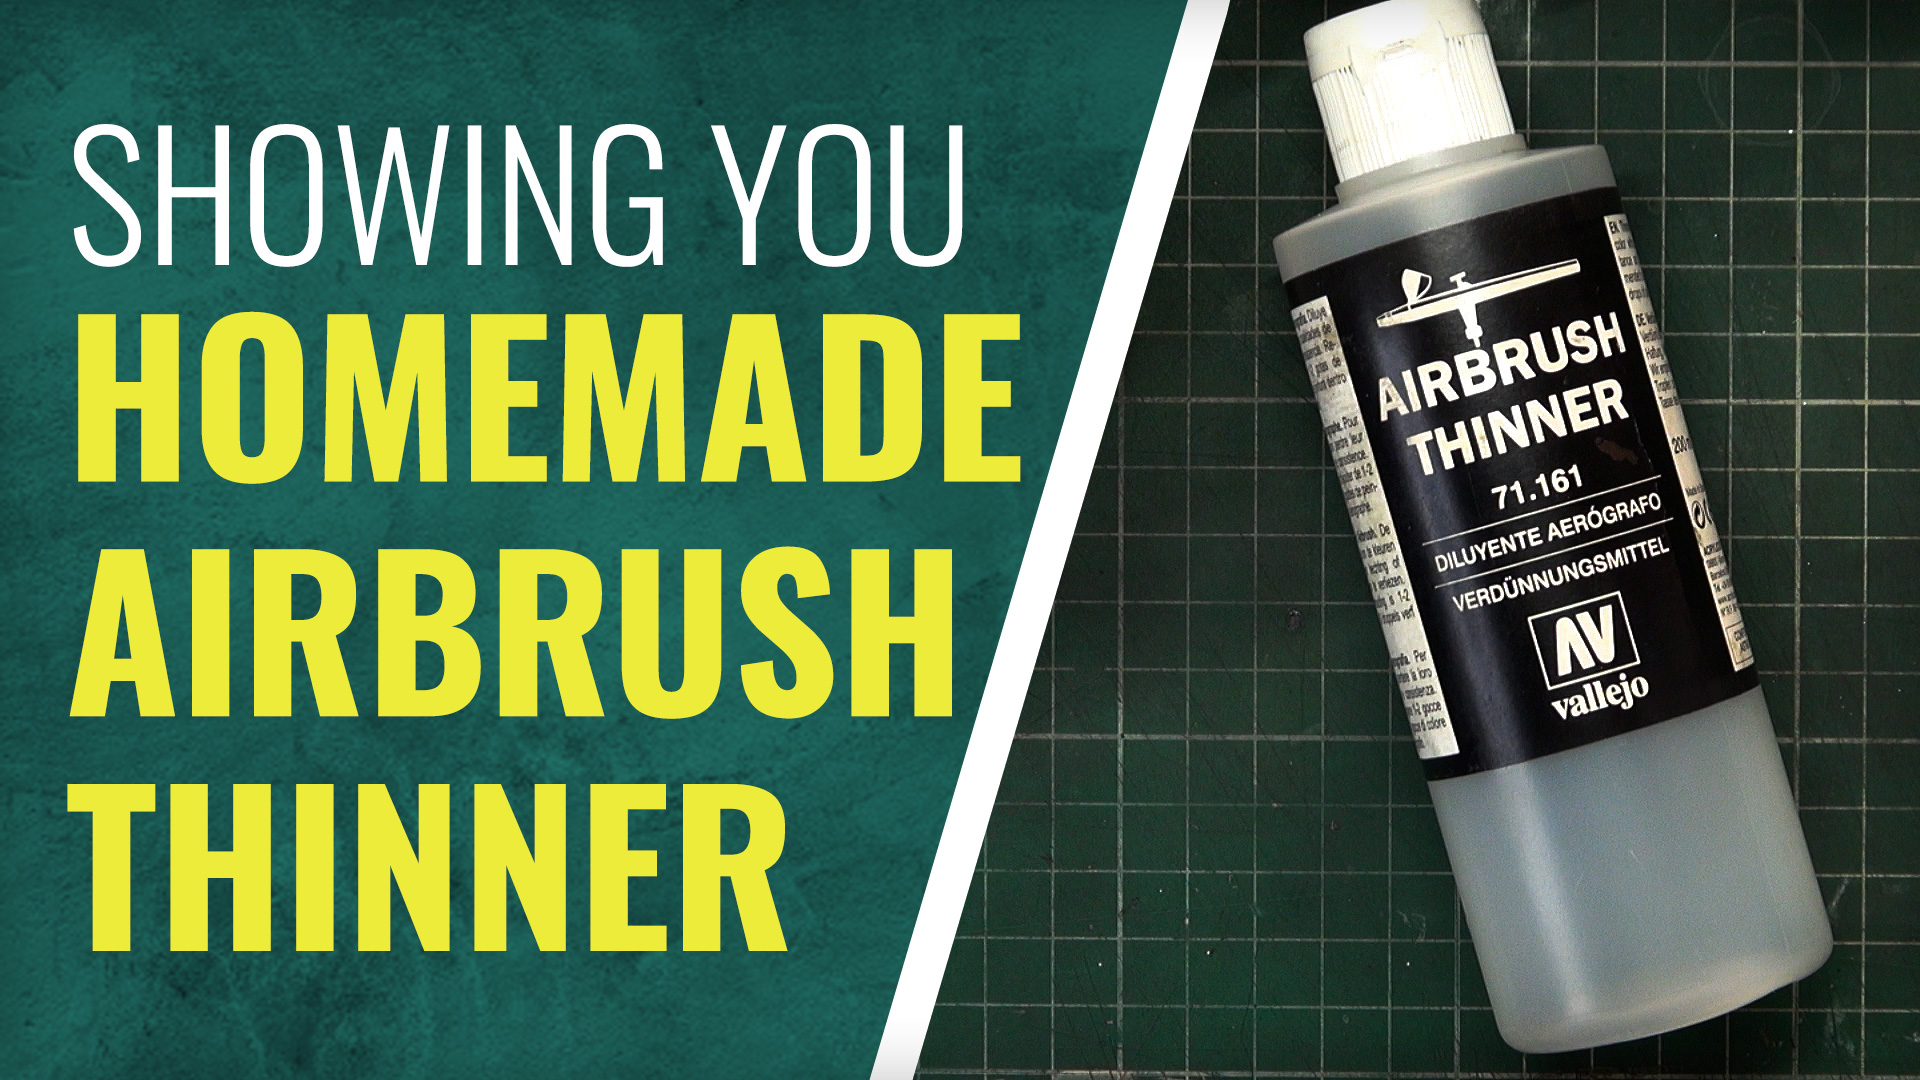 Gerry Can Show You How To Make Cheap Homemde Airbrush Thinner! – OnTableTop  – Home of Beasts of War